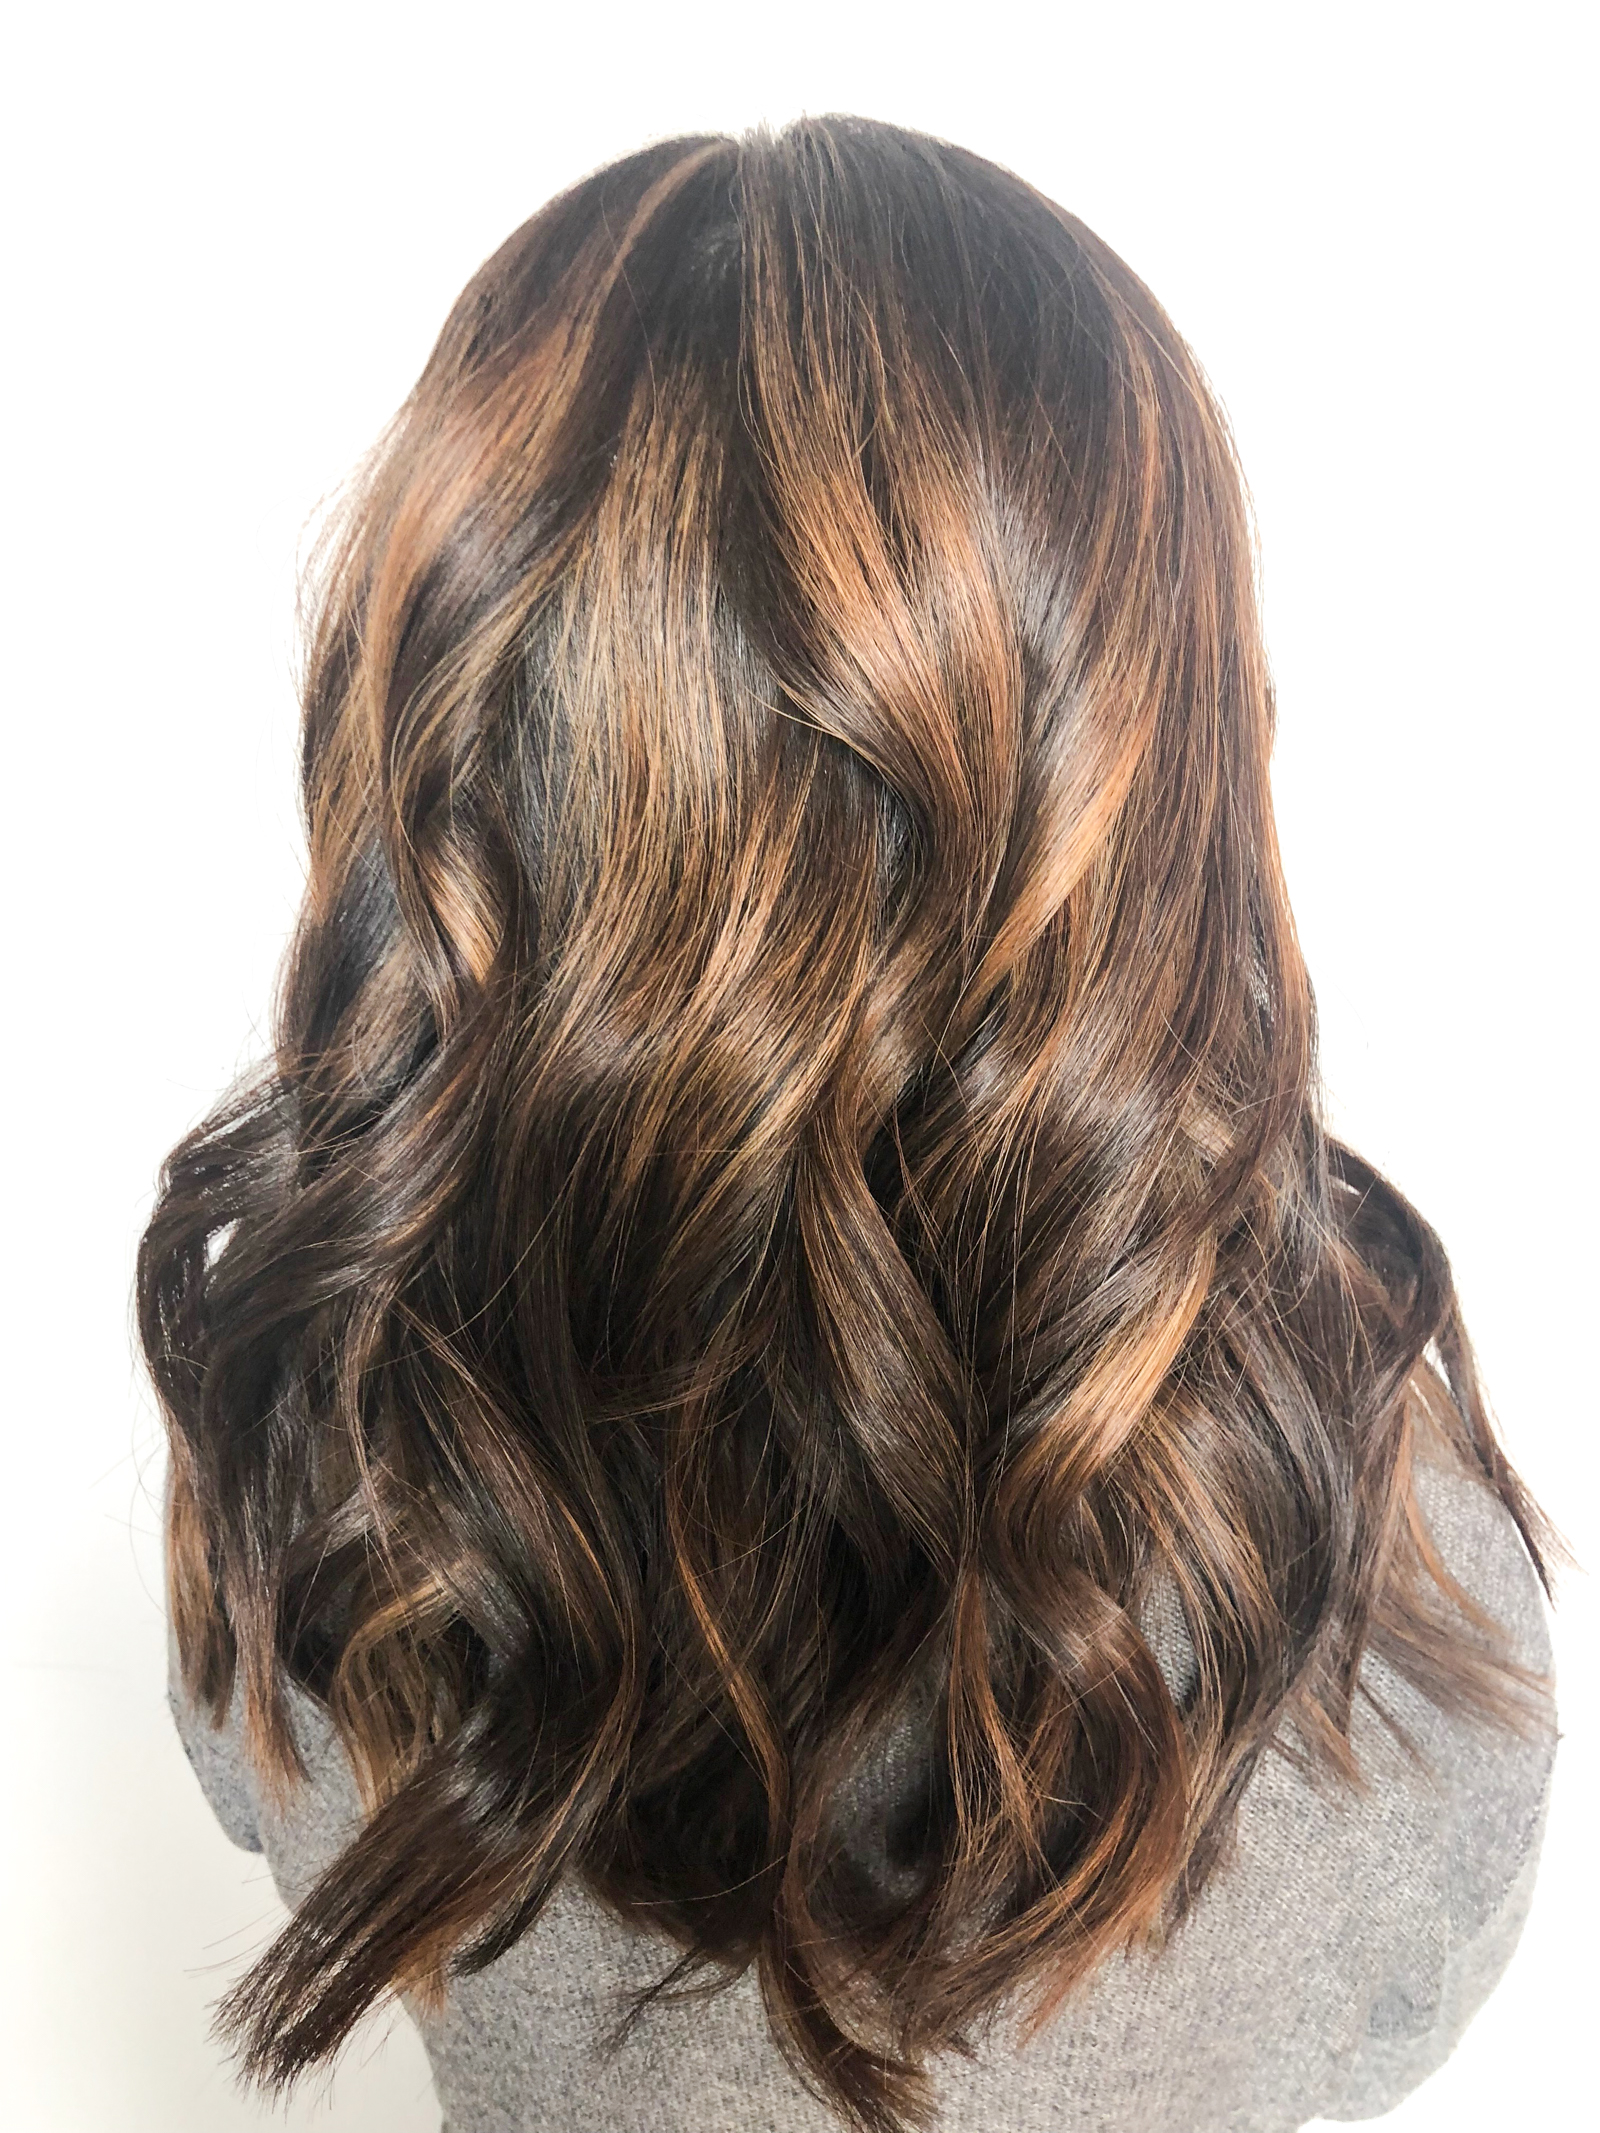 My First Experience with Balayage, Tia Perciballi Fashion and Lifestyle Blog